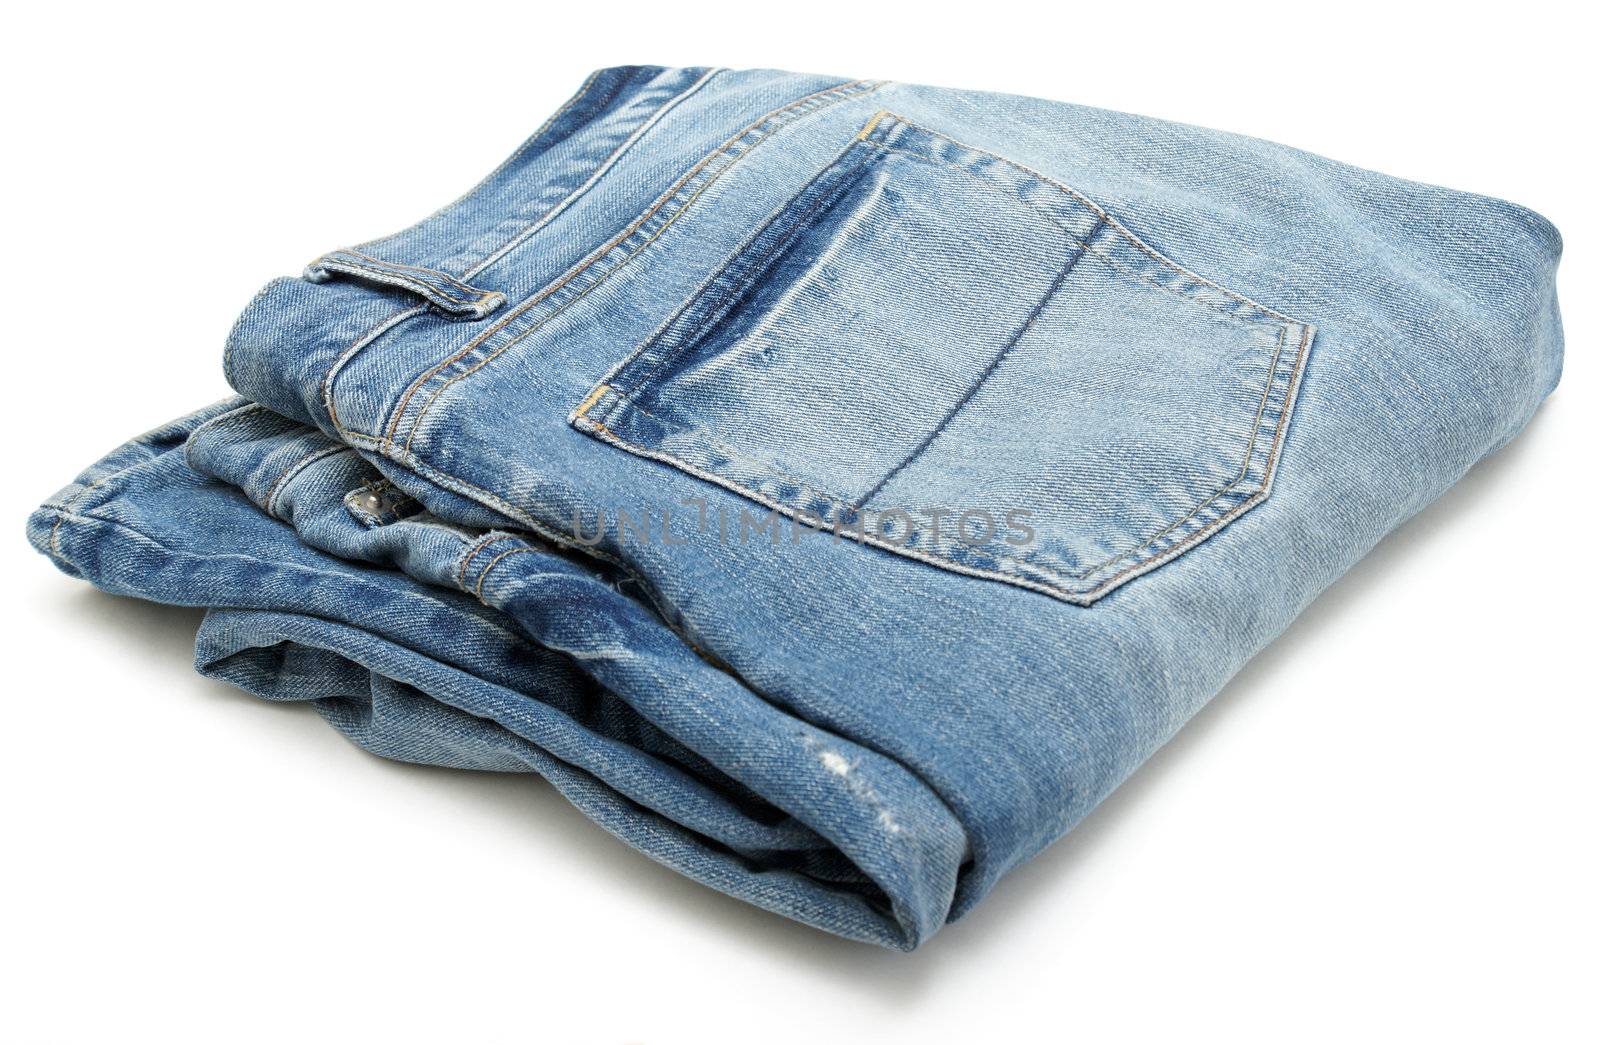 A pair of blue denim jeans on white background.